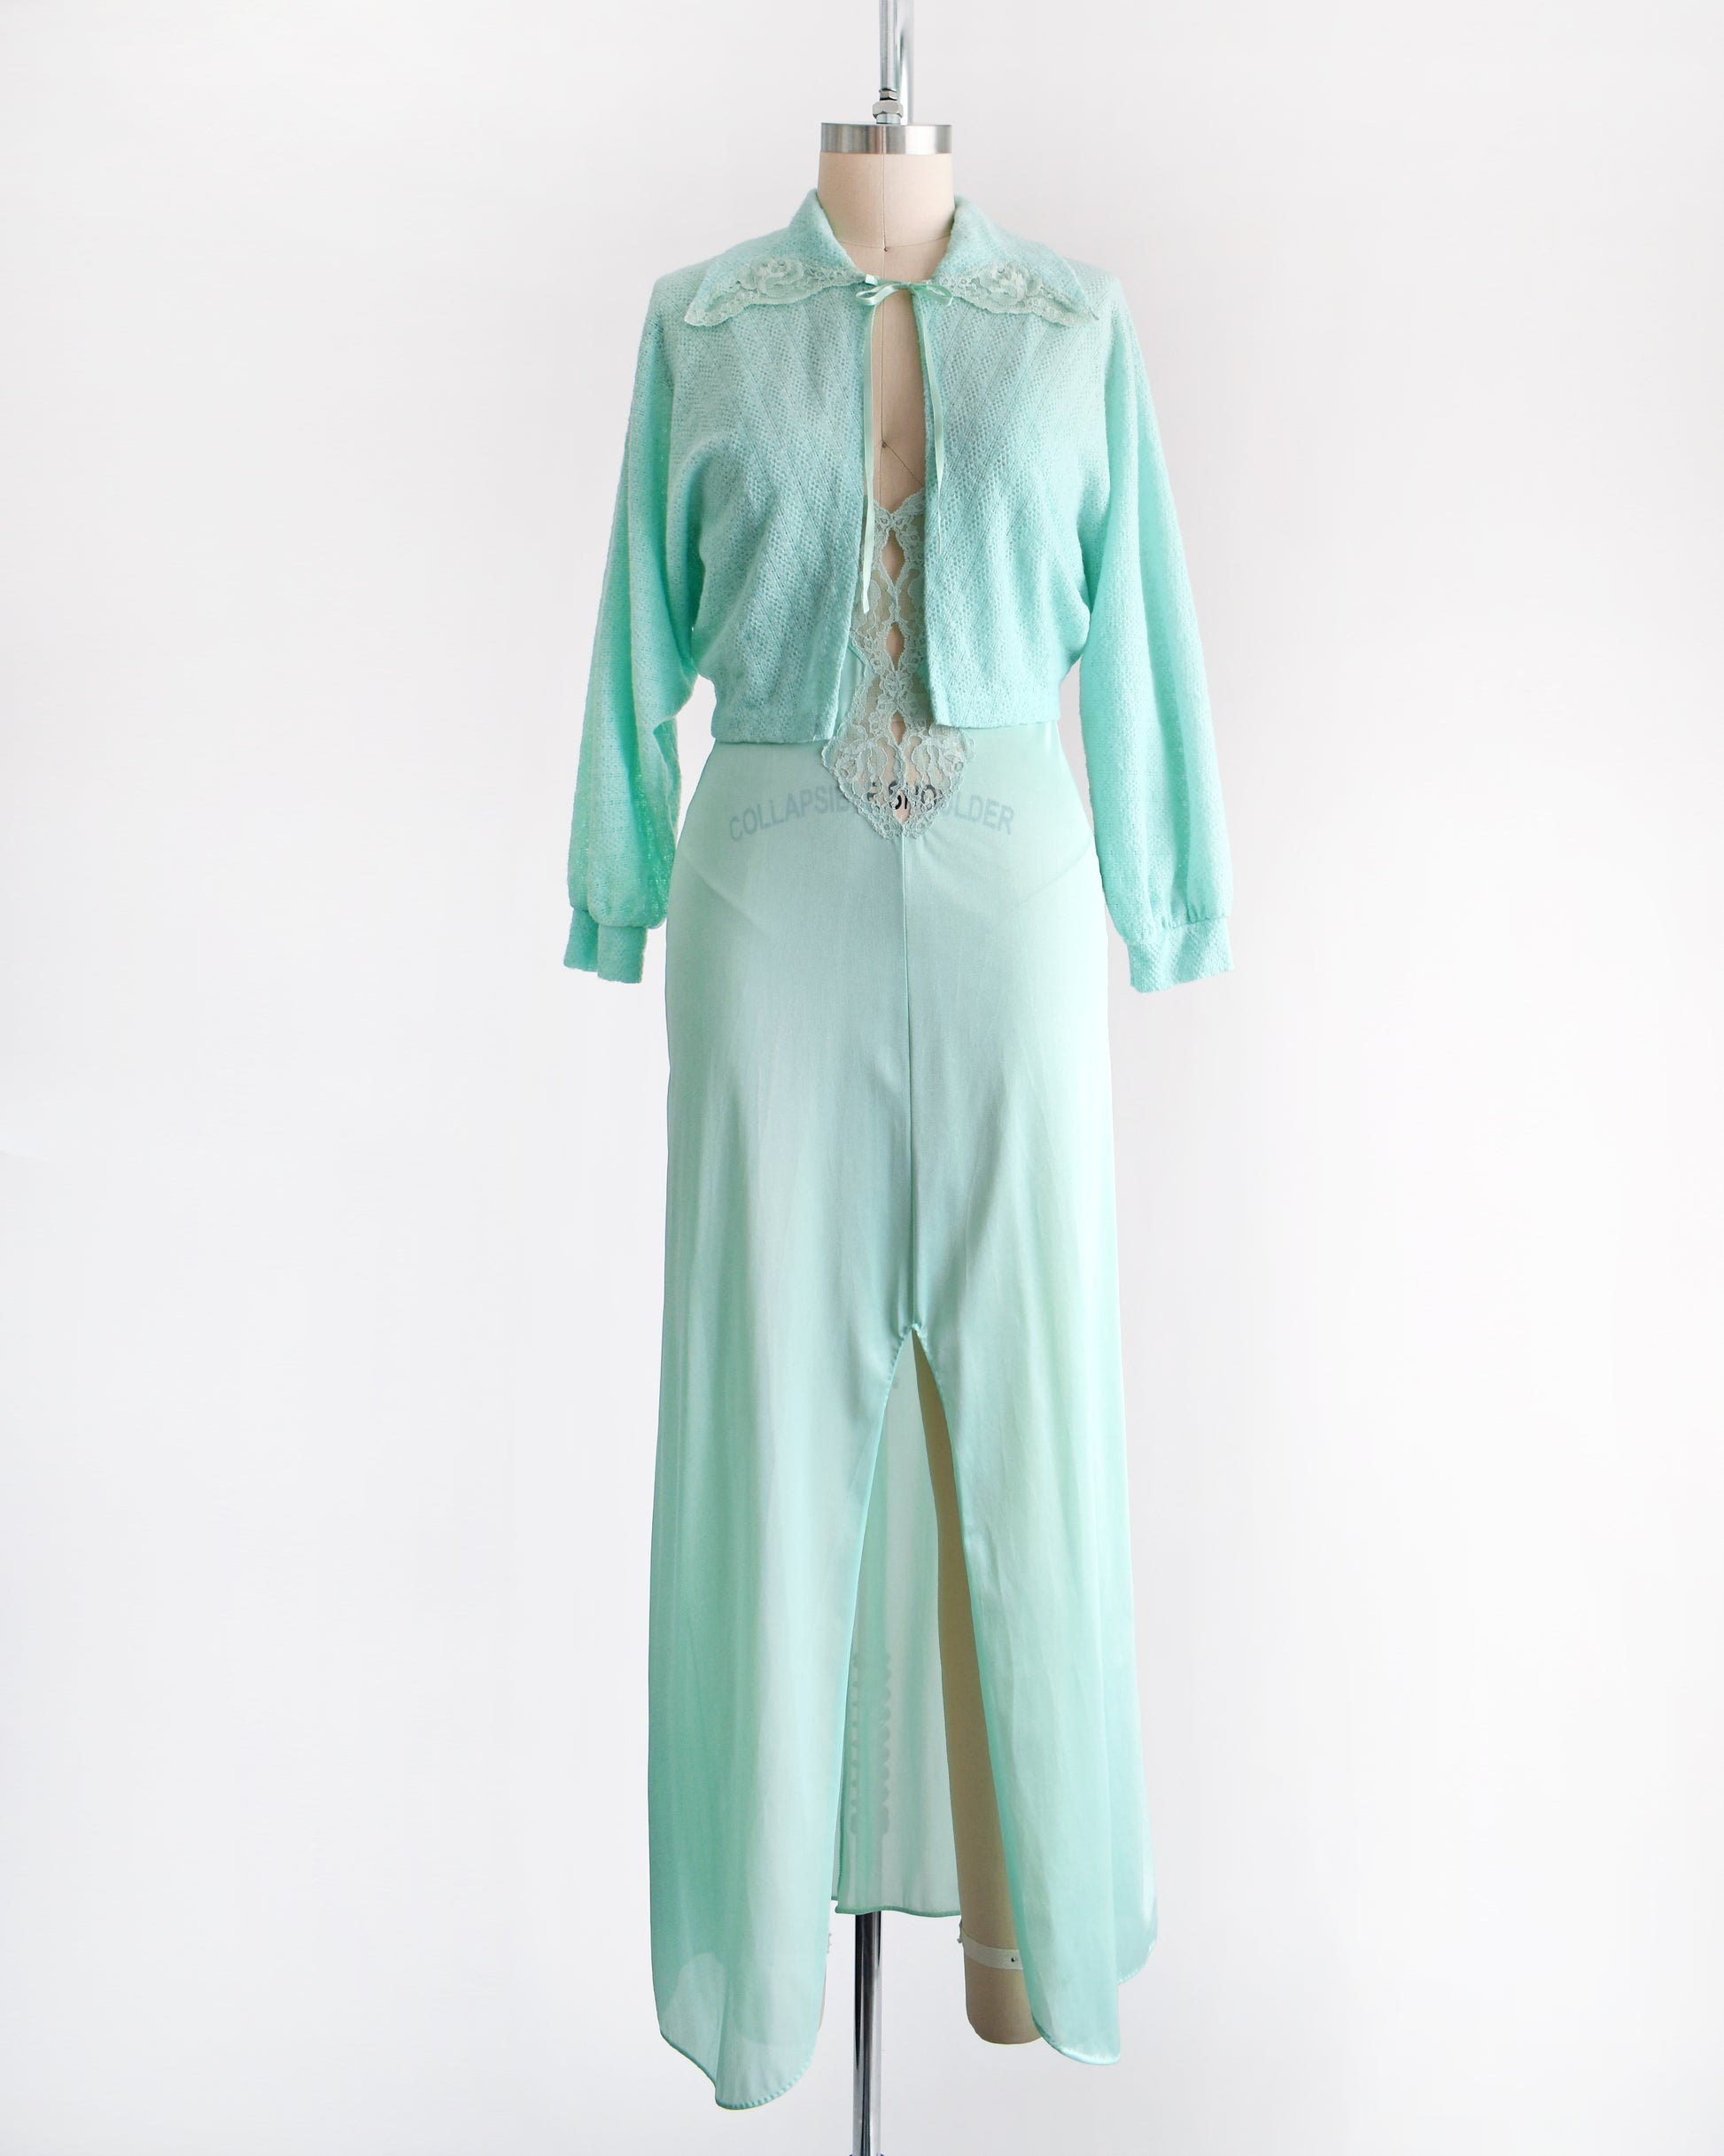 A vintage 1970s mint green nightgown and bed jacket set.